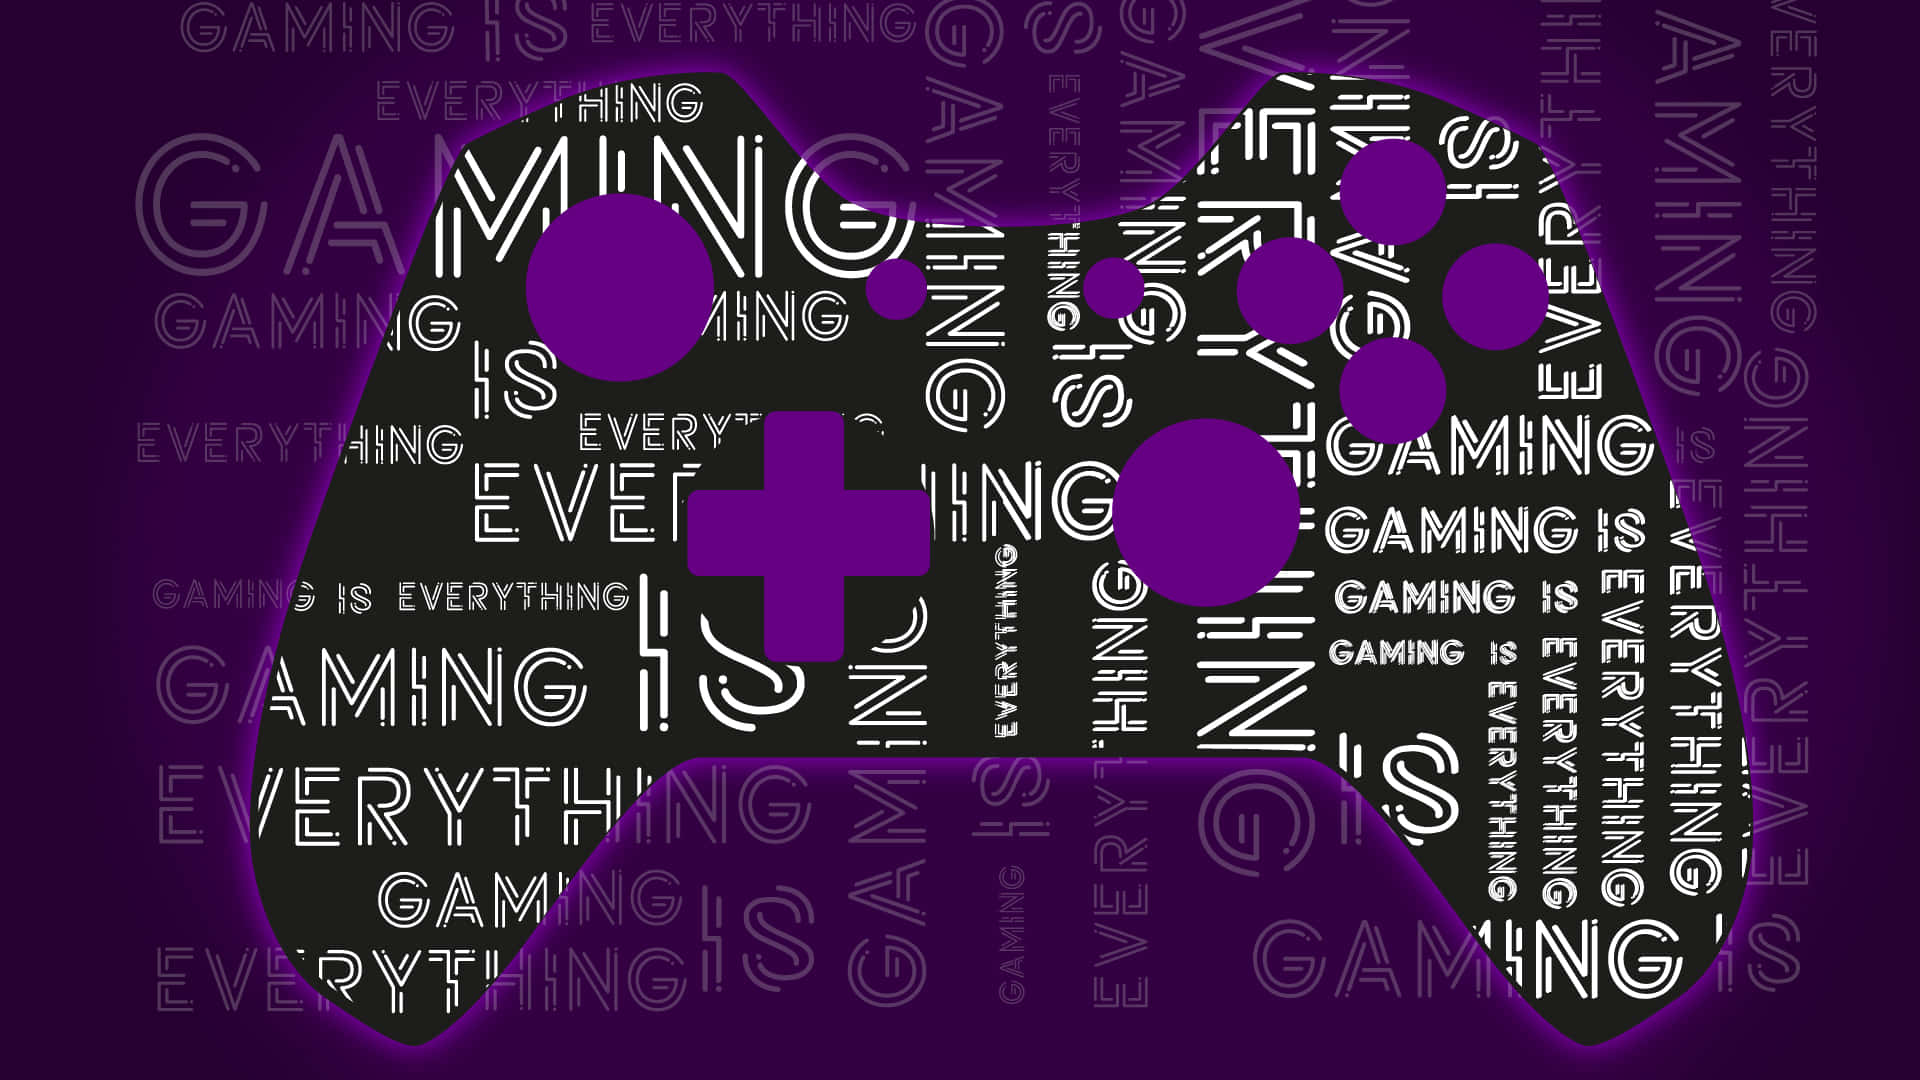 A Purple Gaming Controller With Words On It